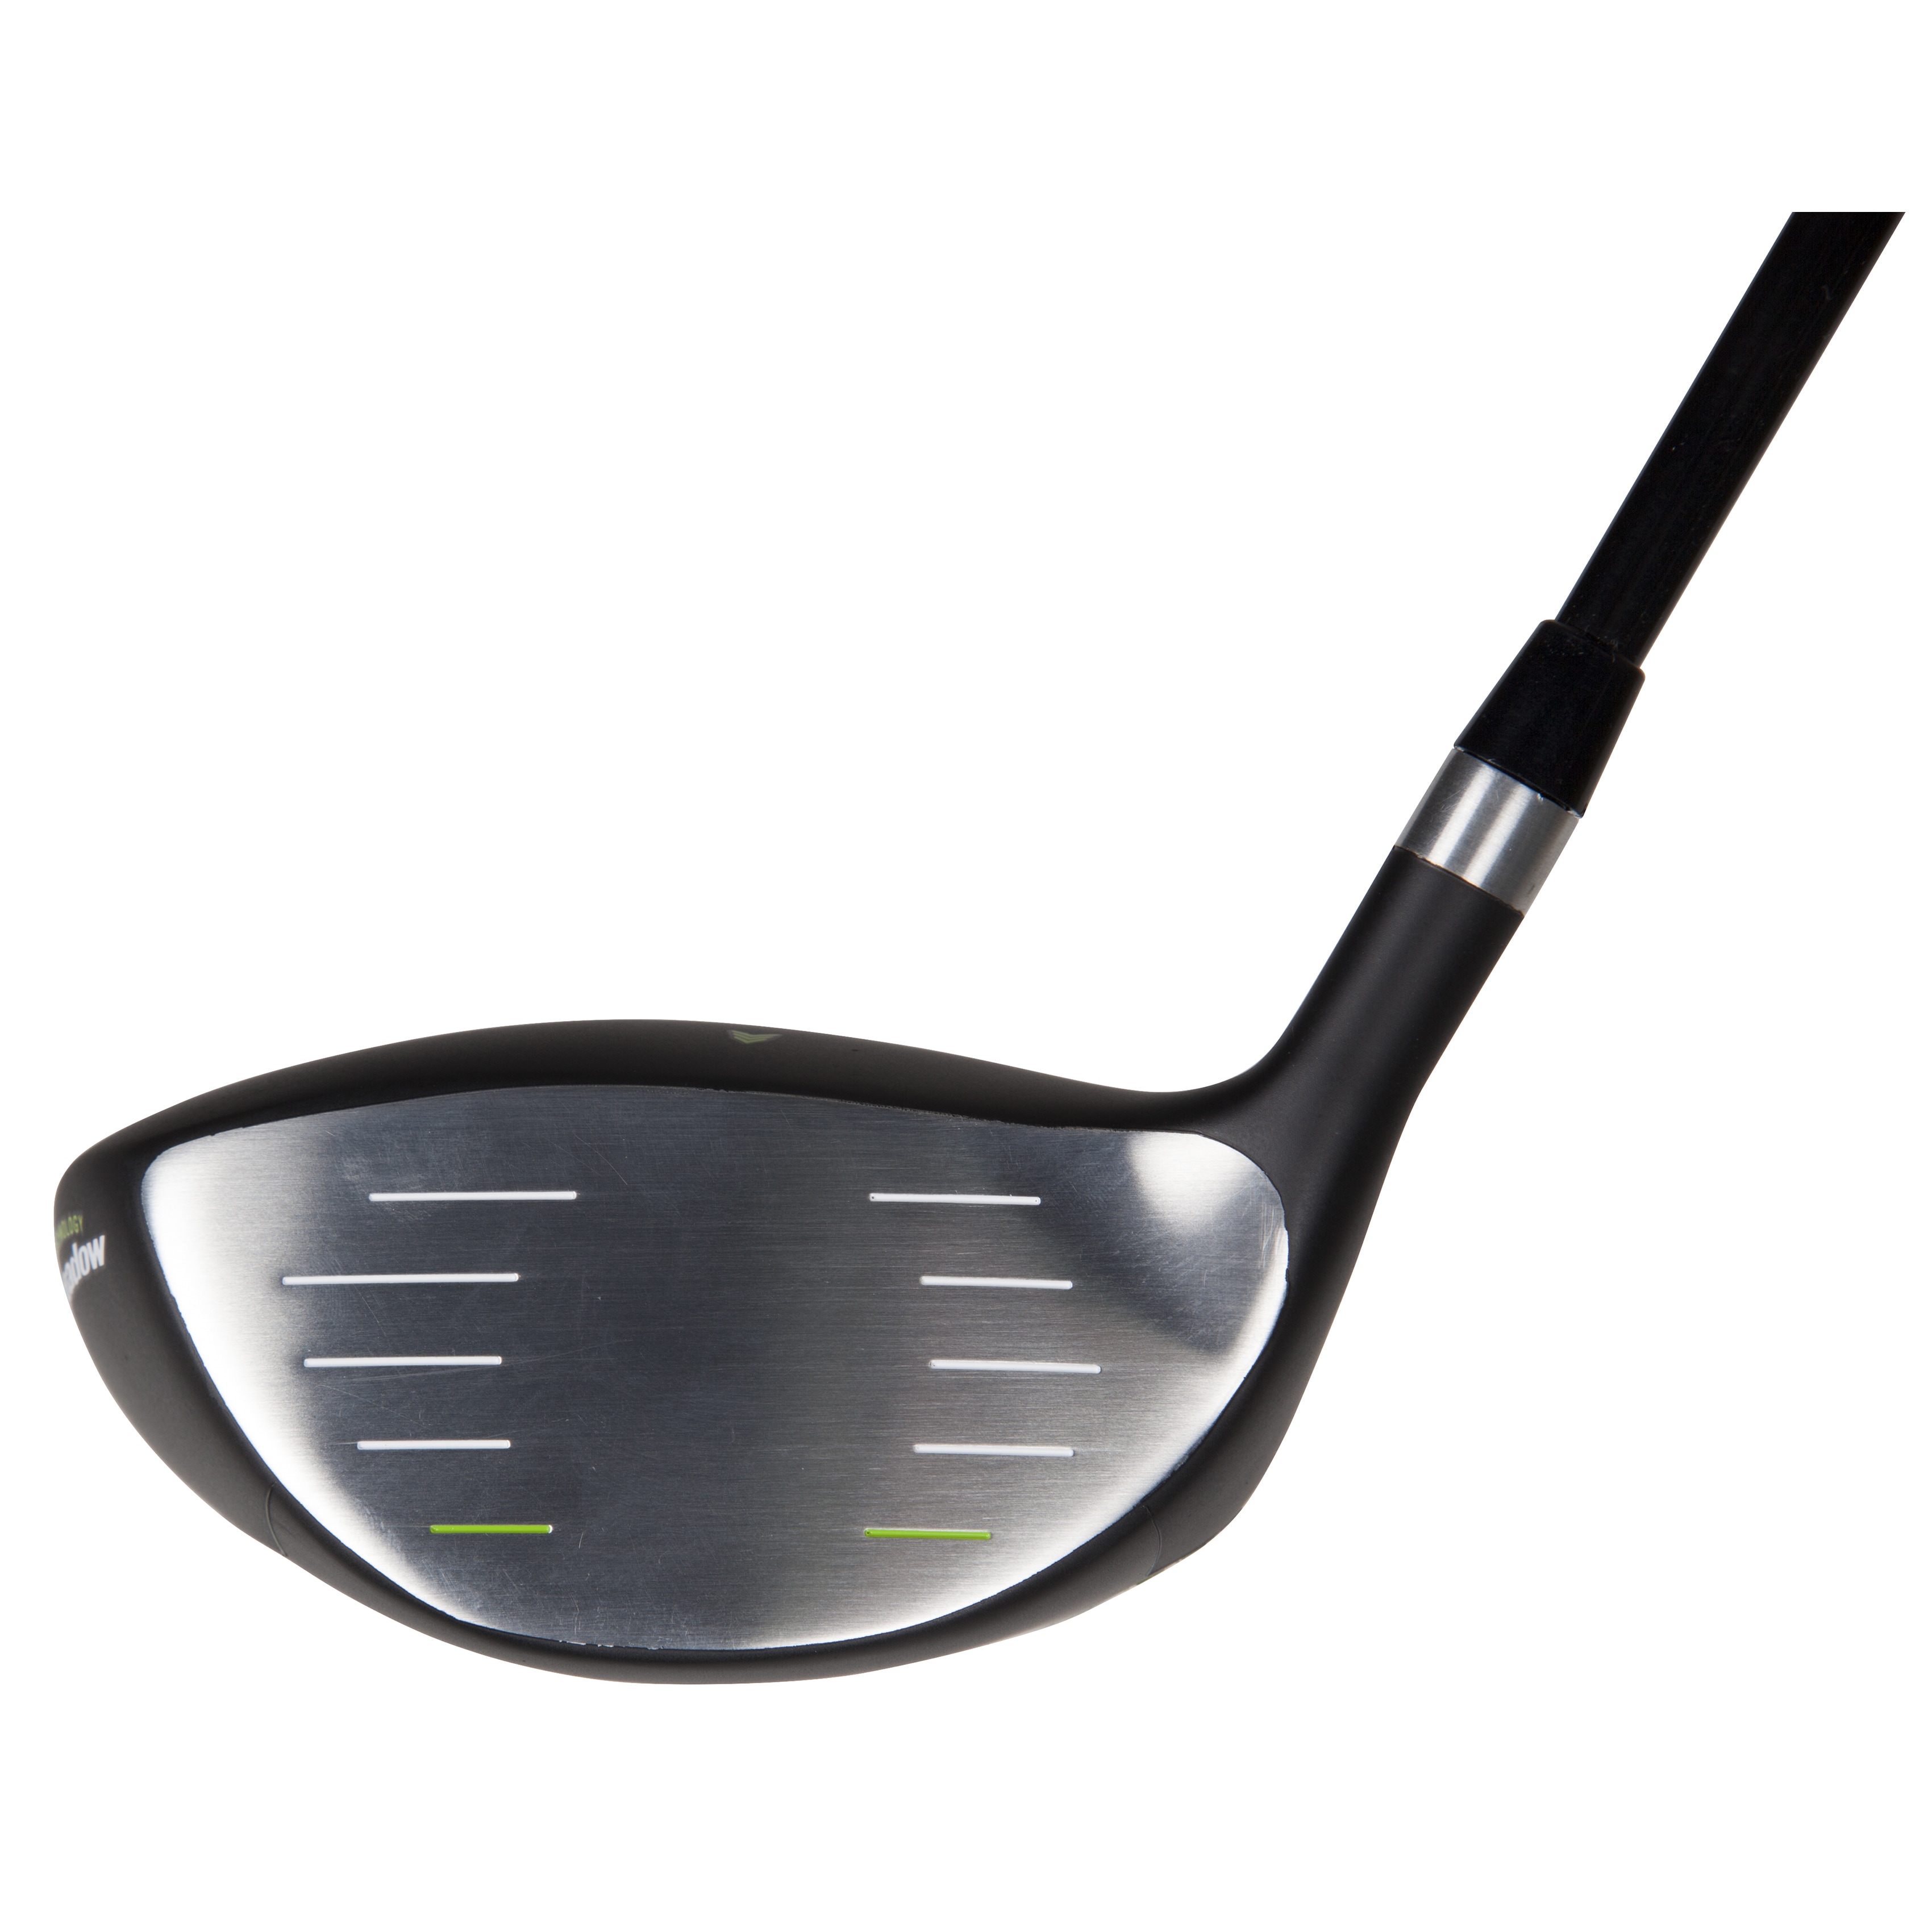 Pinemeadow Golf PGX Offset Driver - image 5 of 5